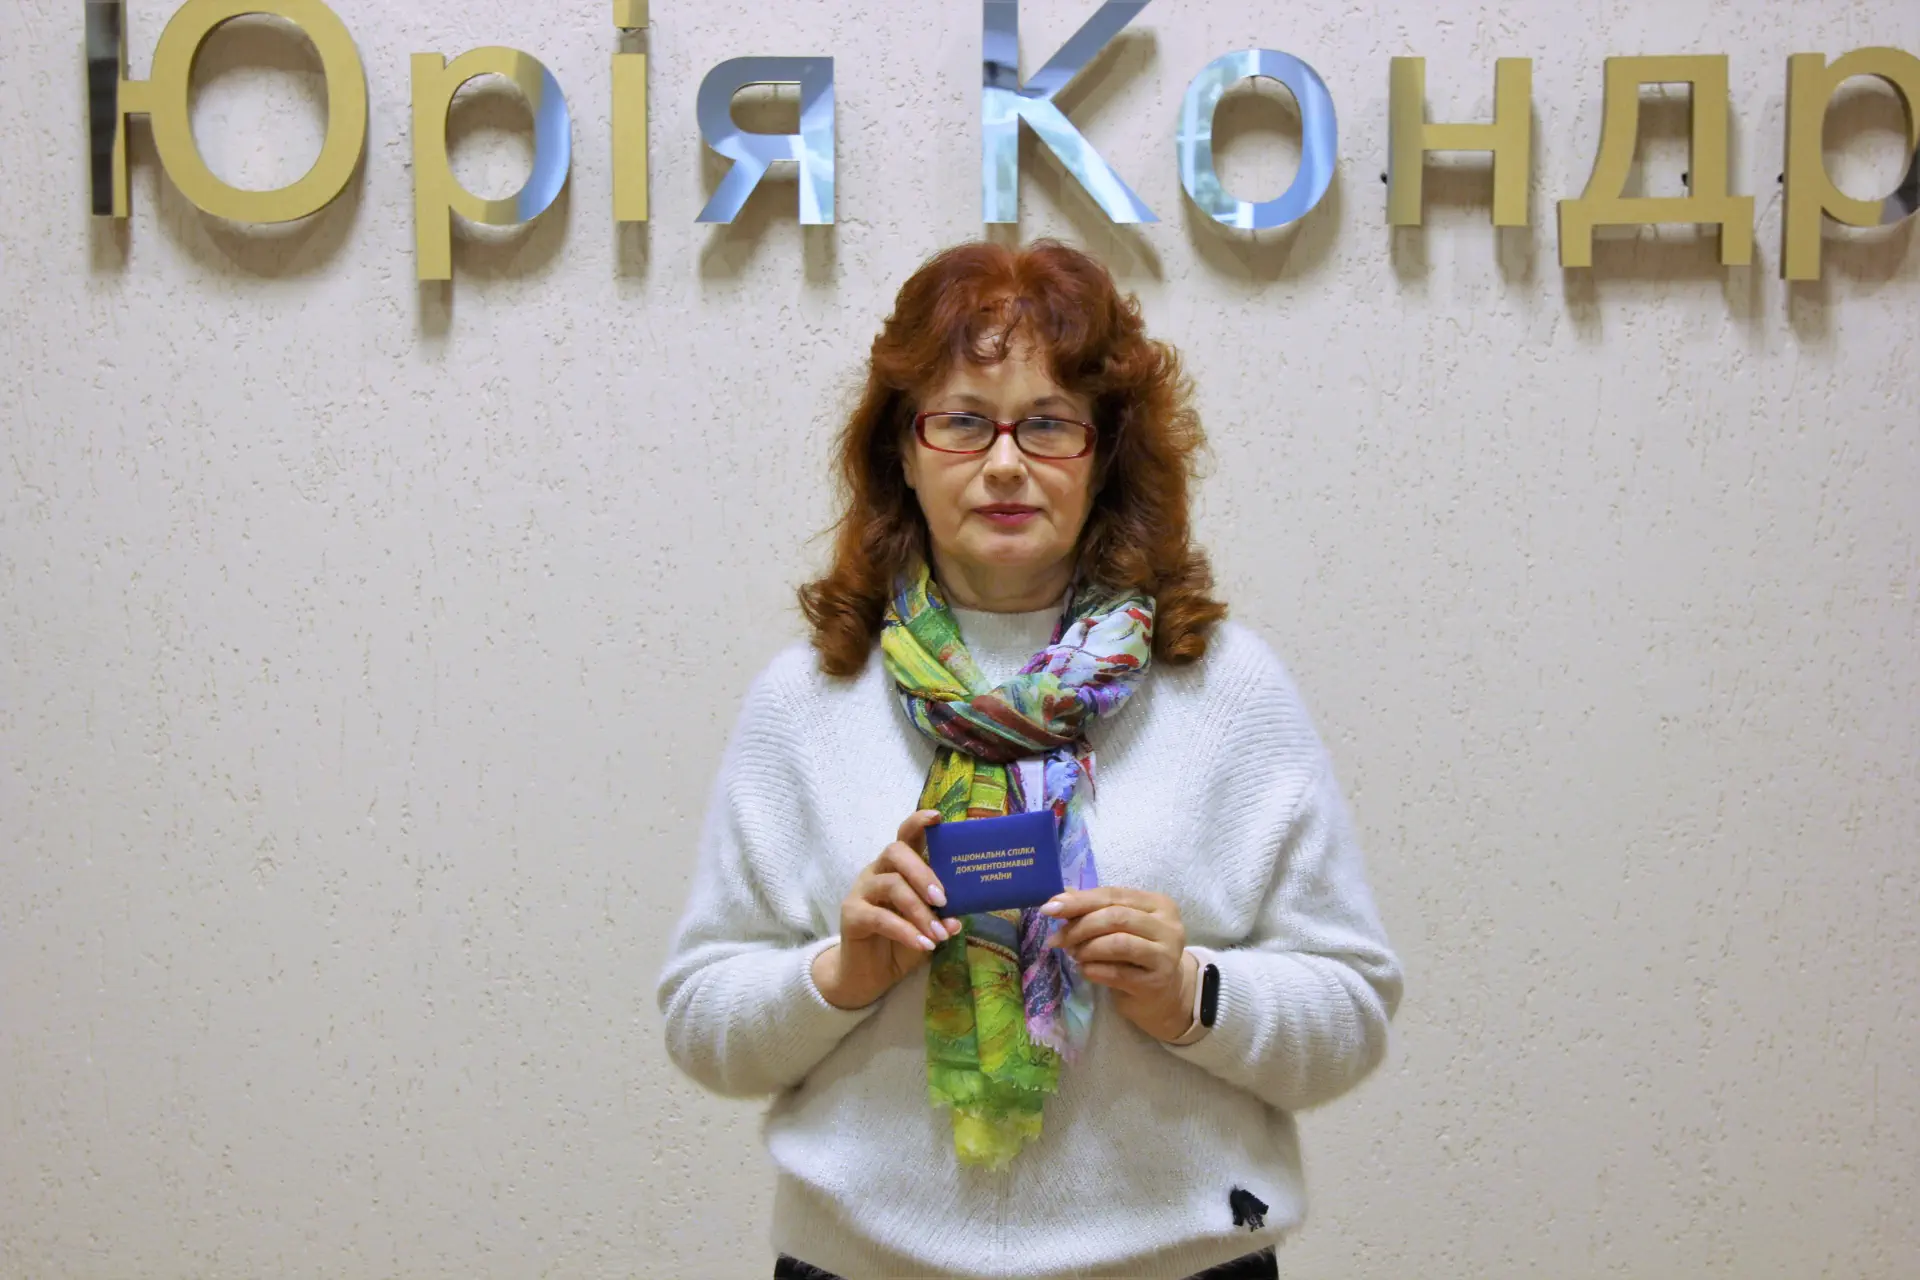 Scientist-philologist heads the Poltava branch of the National Union of Document Specialist of Ukraine